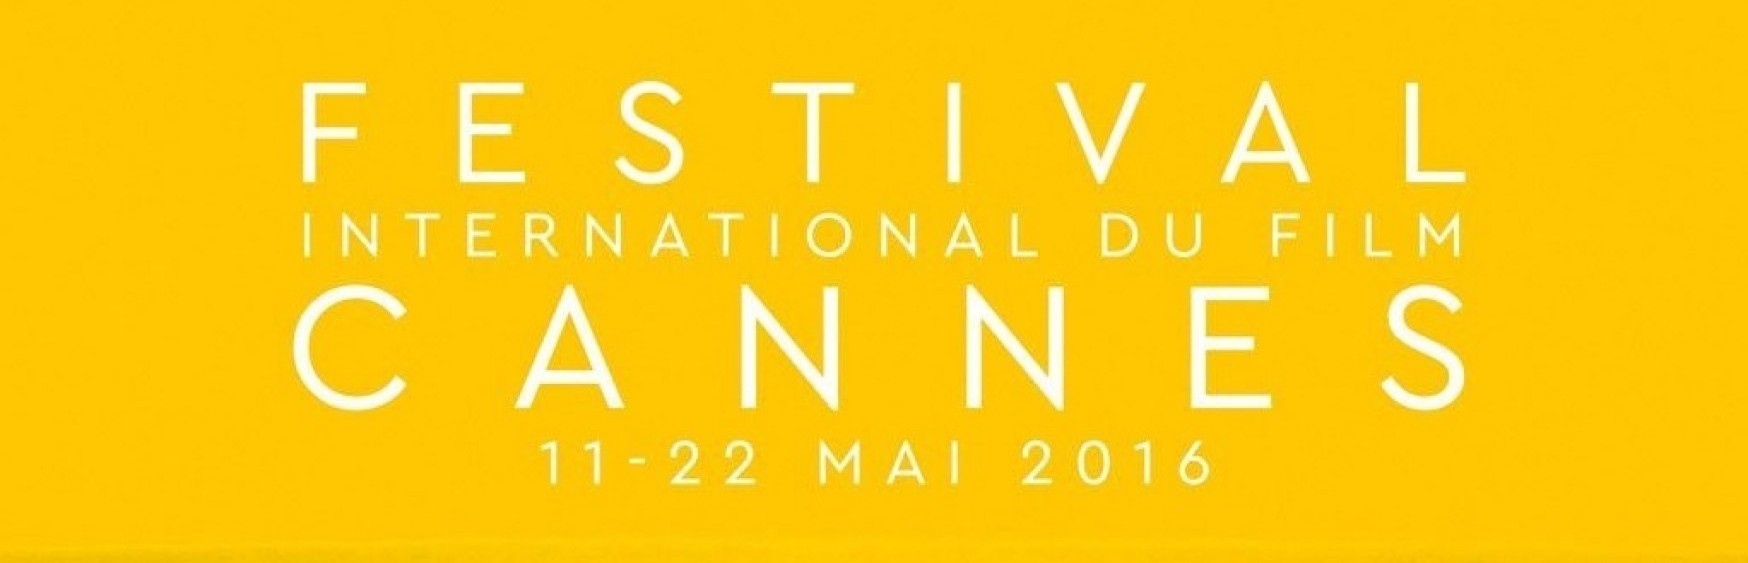 Cannes 2016 Festival